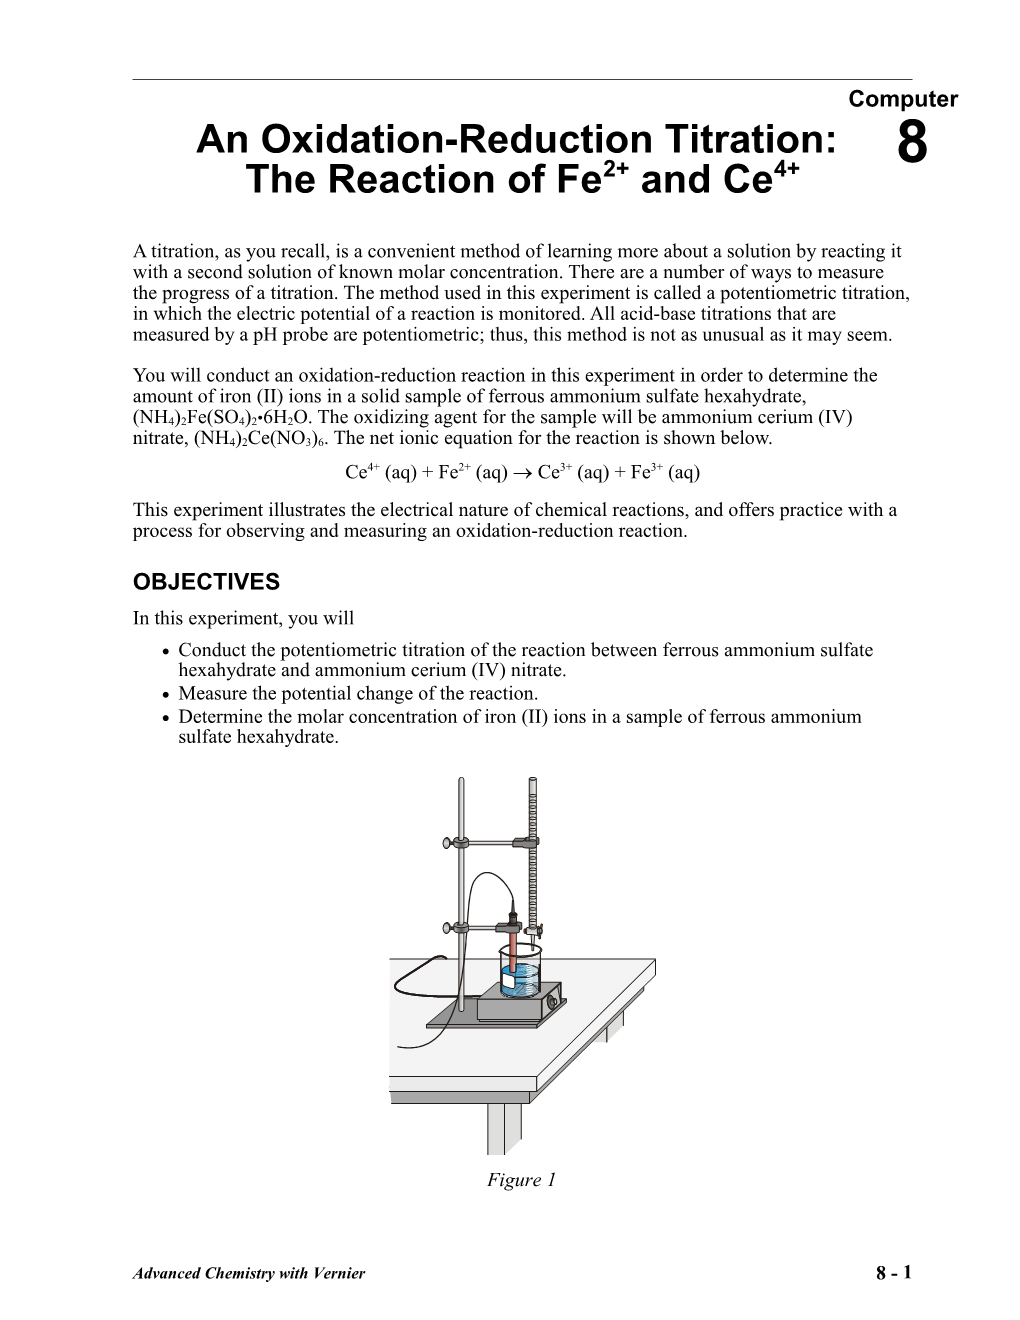 An Oxidation-Reduction Titration: the Reaction of Fe2+ and Ce4+